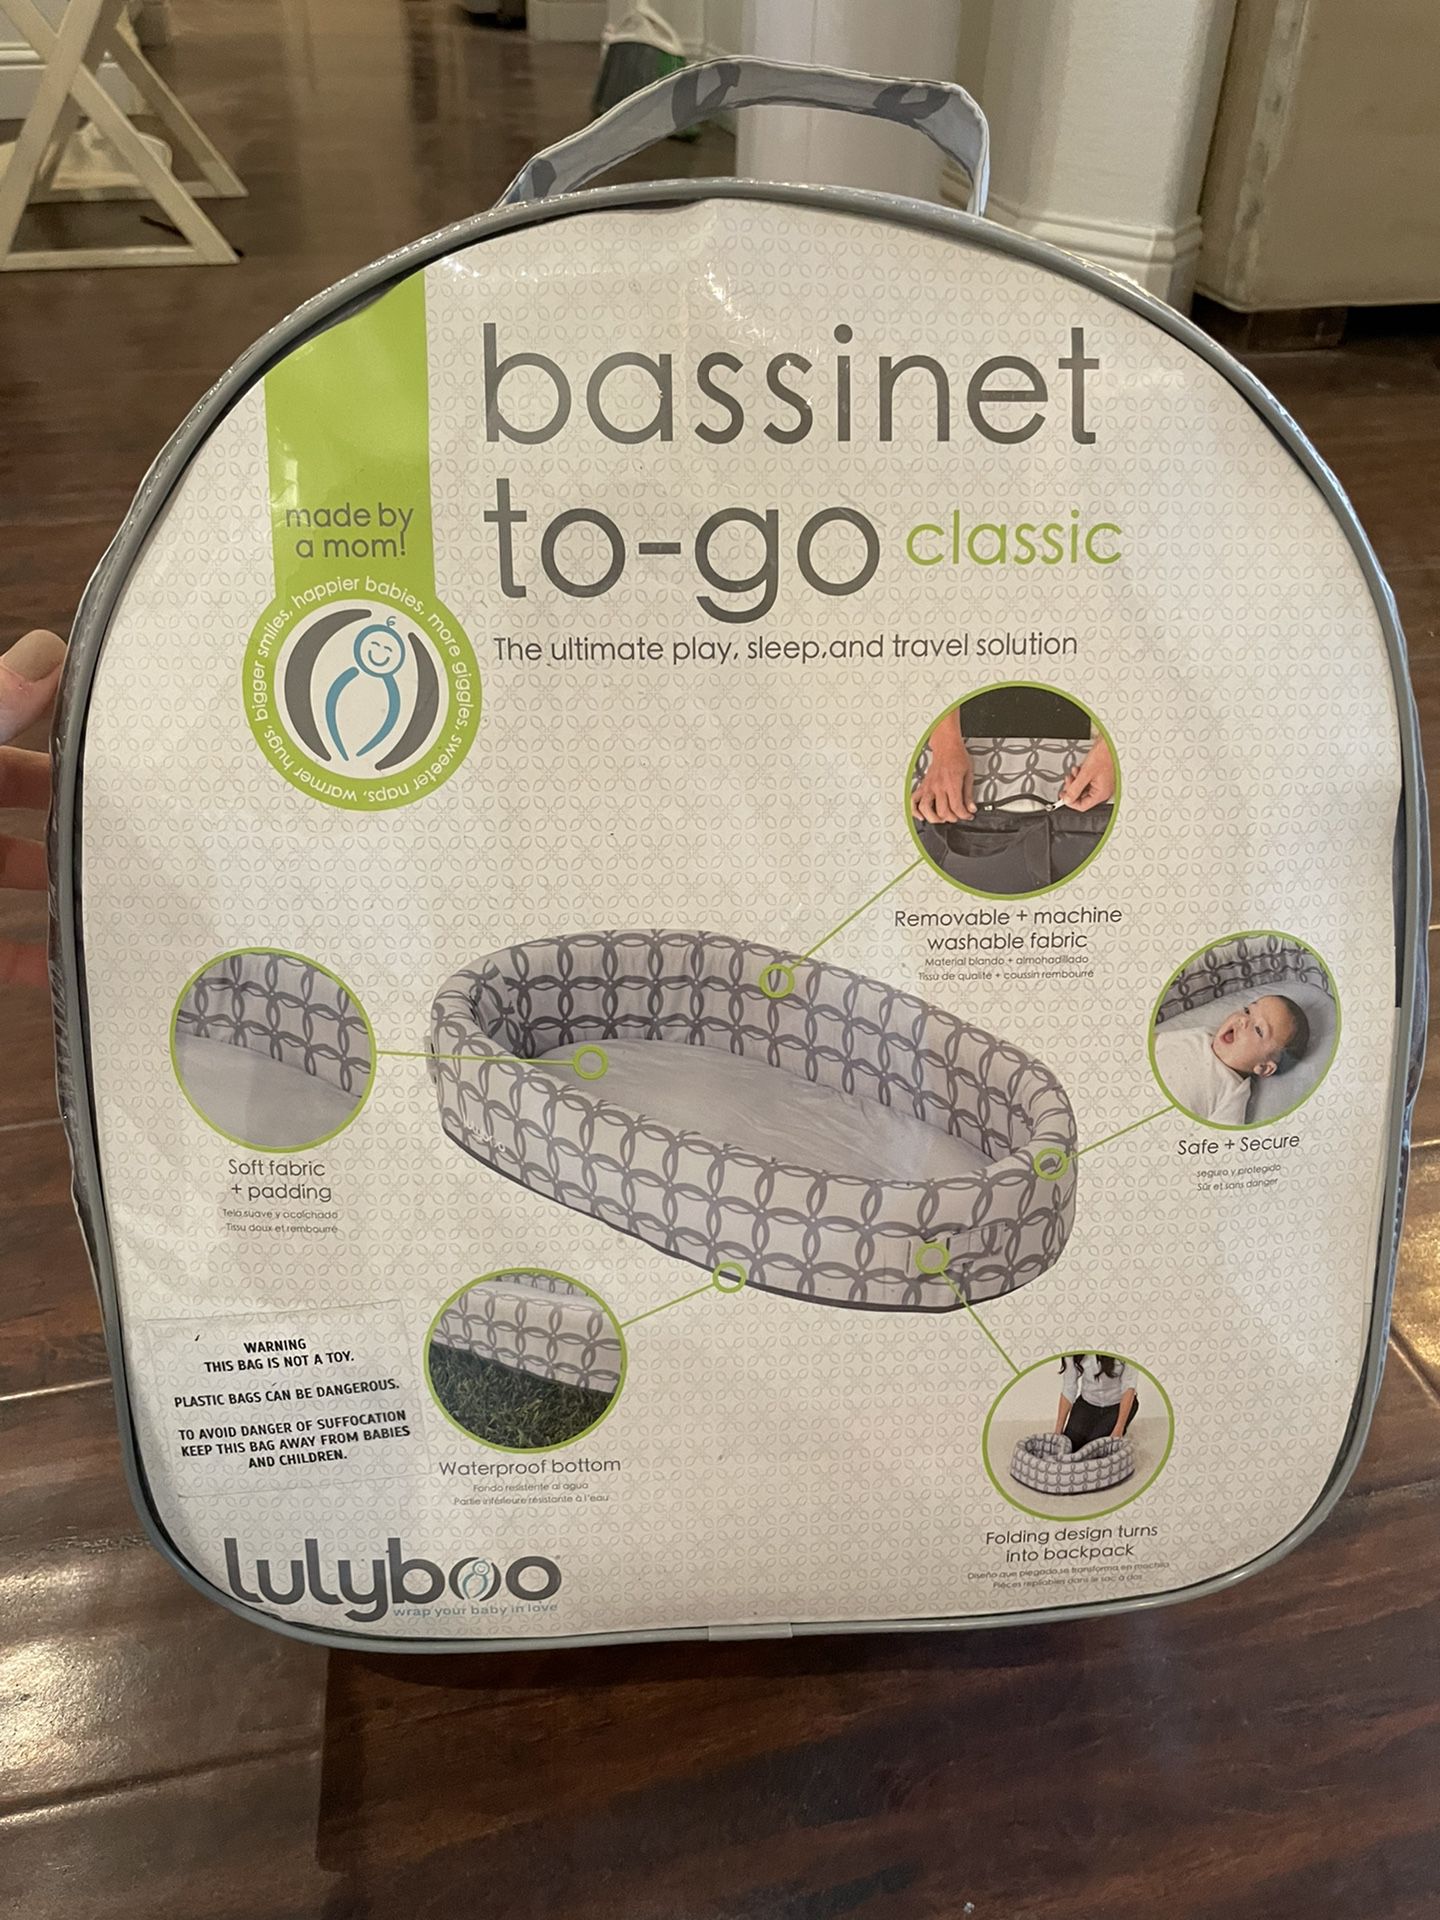 Bassinet To-Go